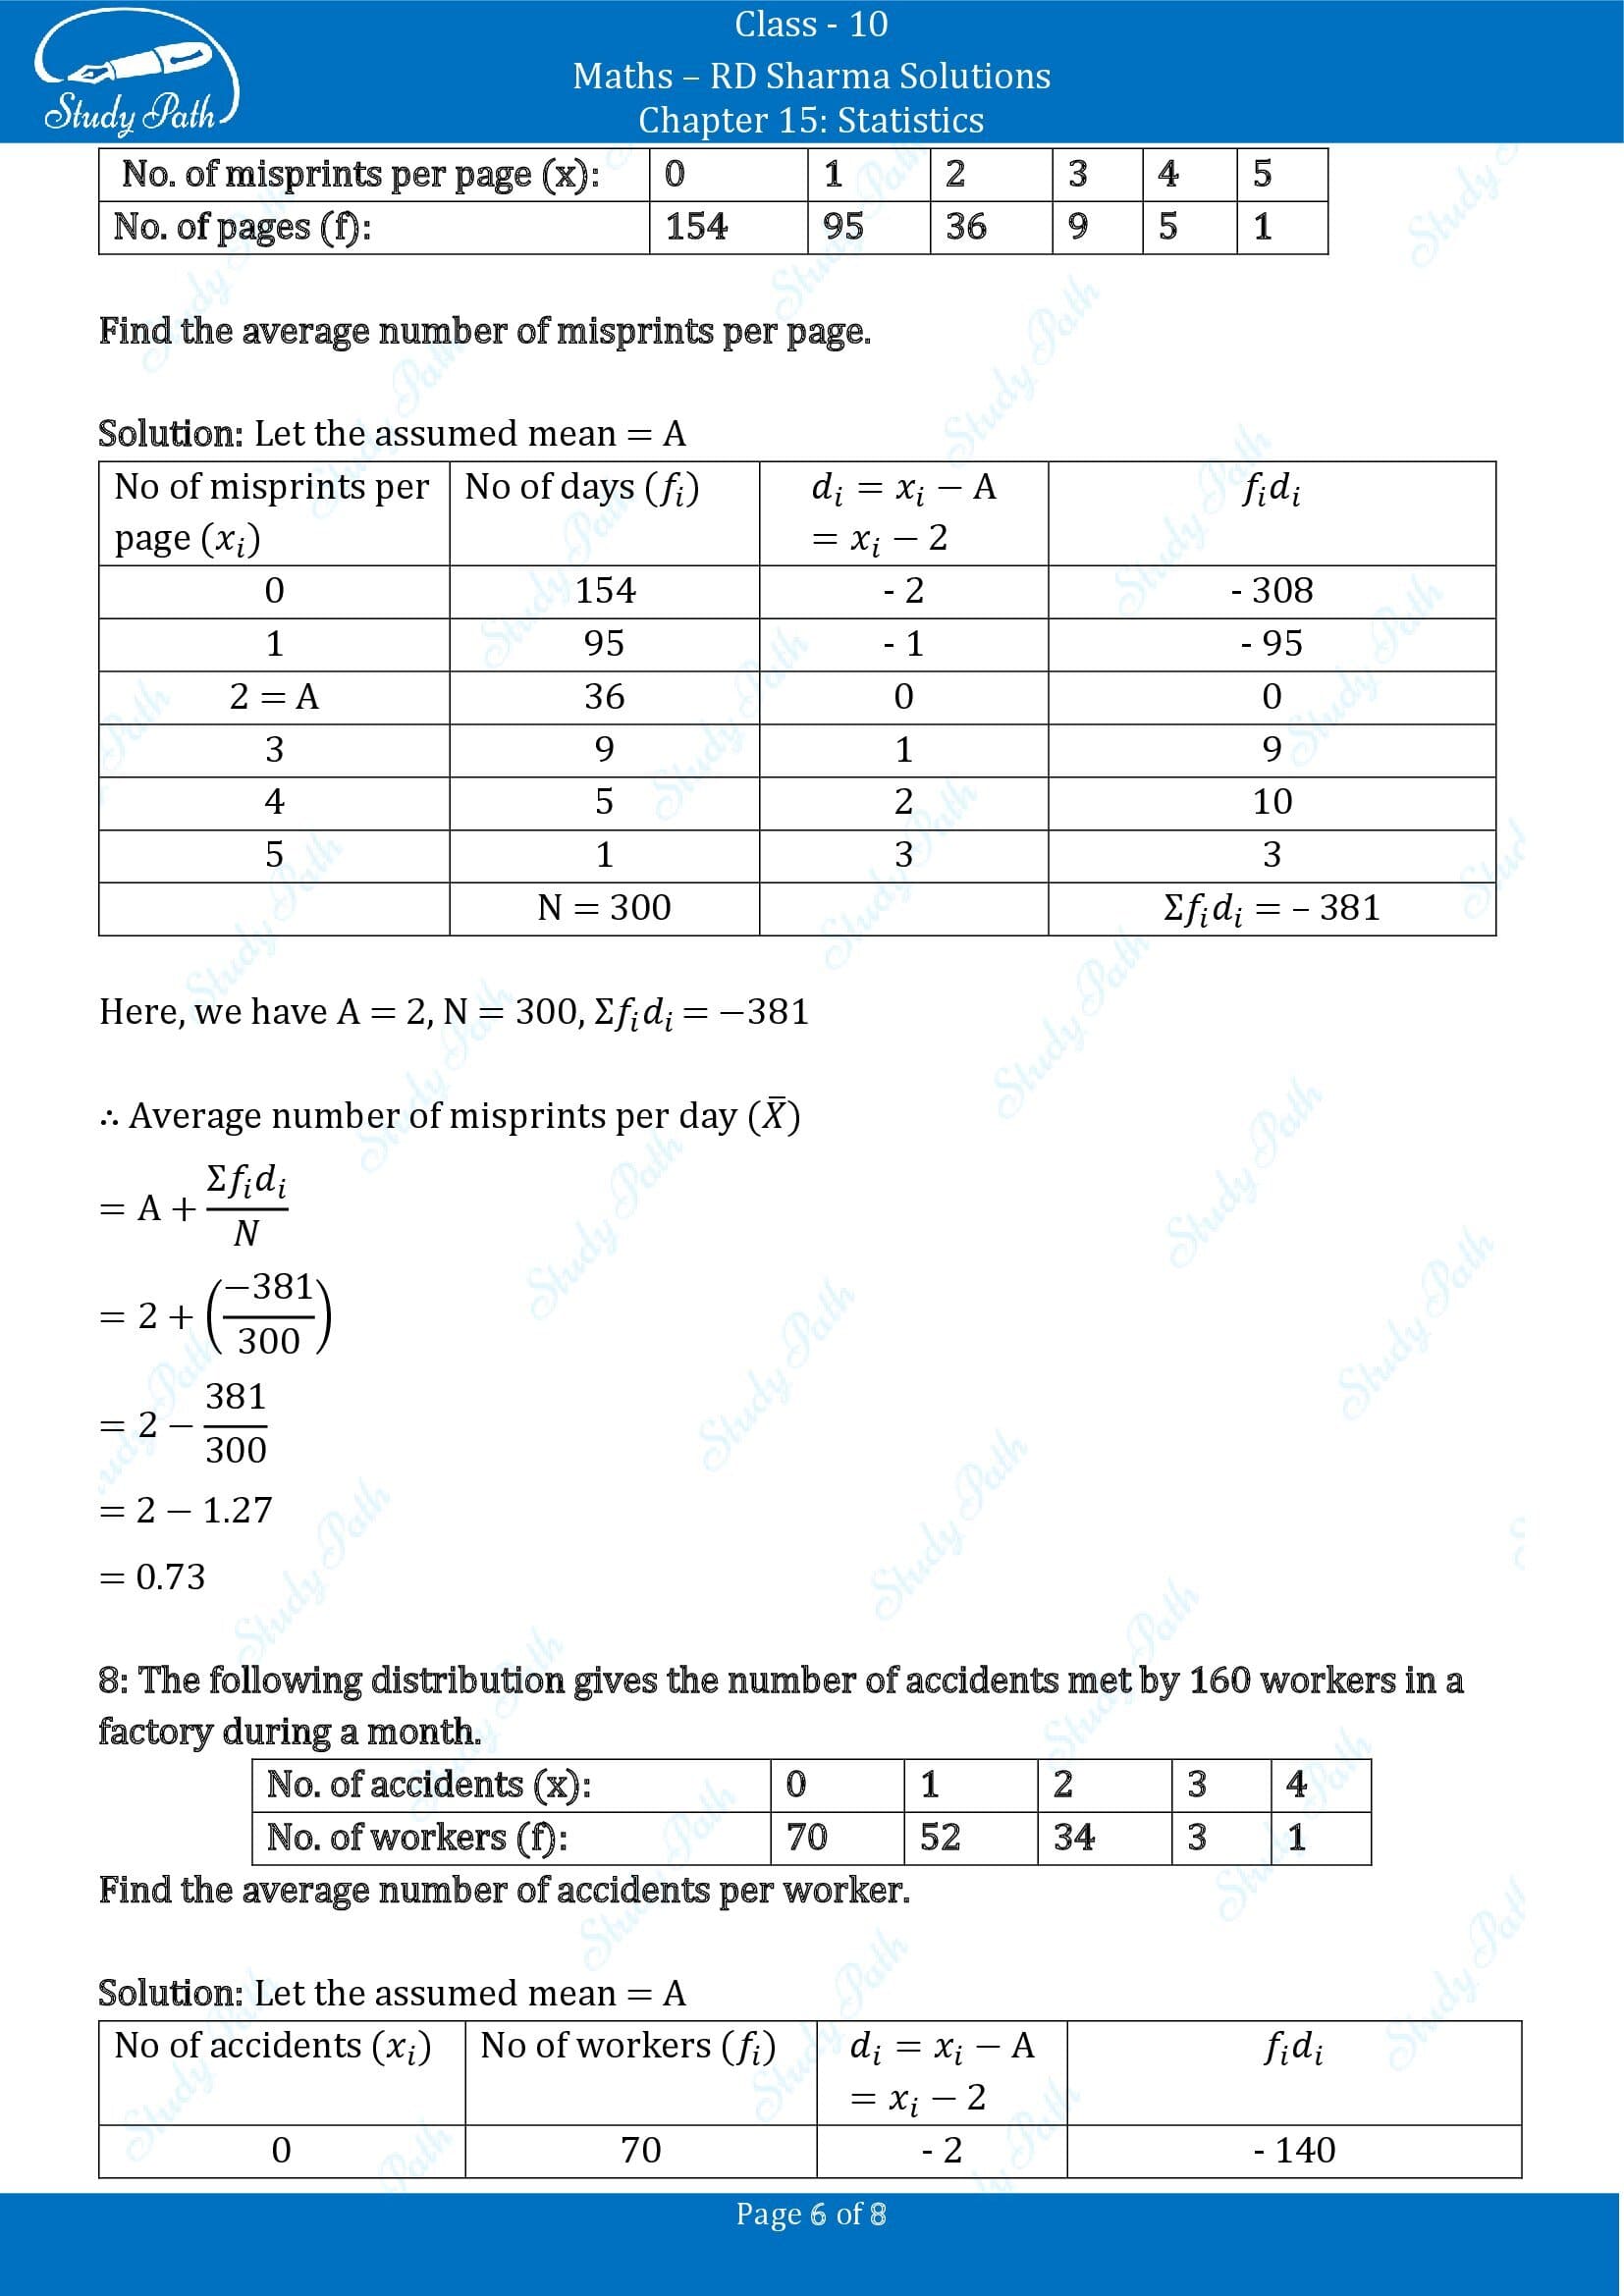 RD Sharma Solutions Class 10 Chapter 15 Statistics Exercise 15.2 00006